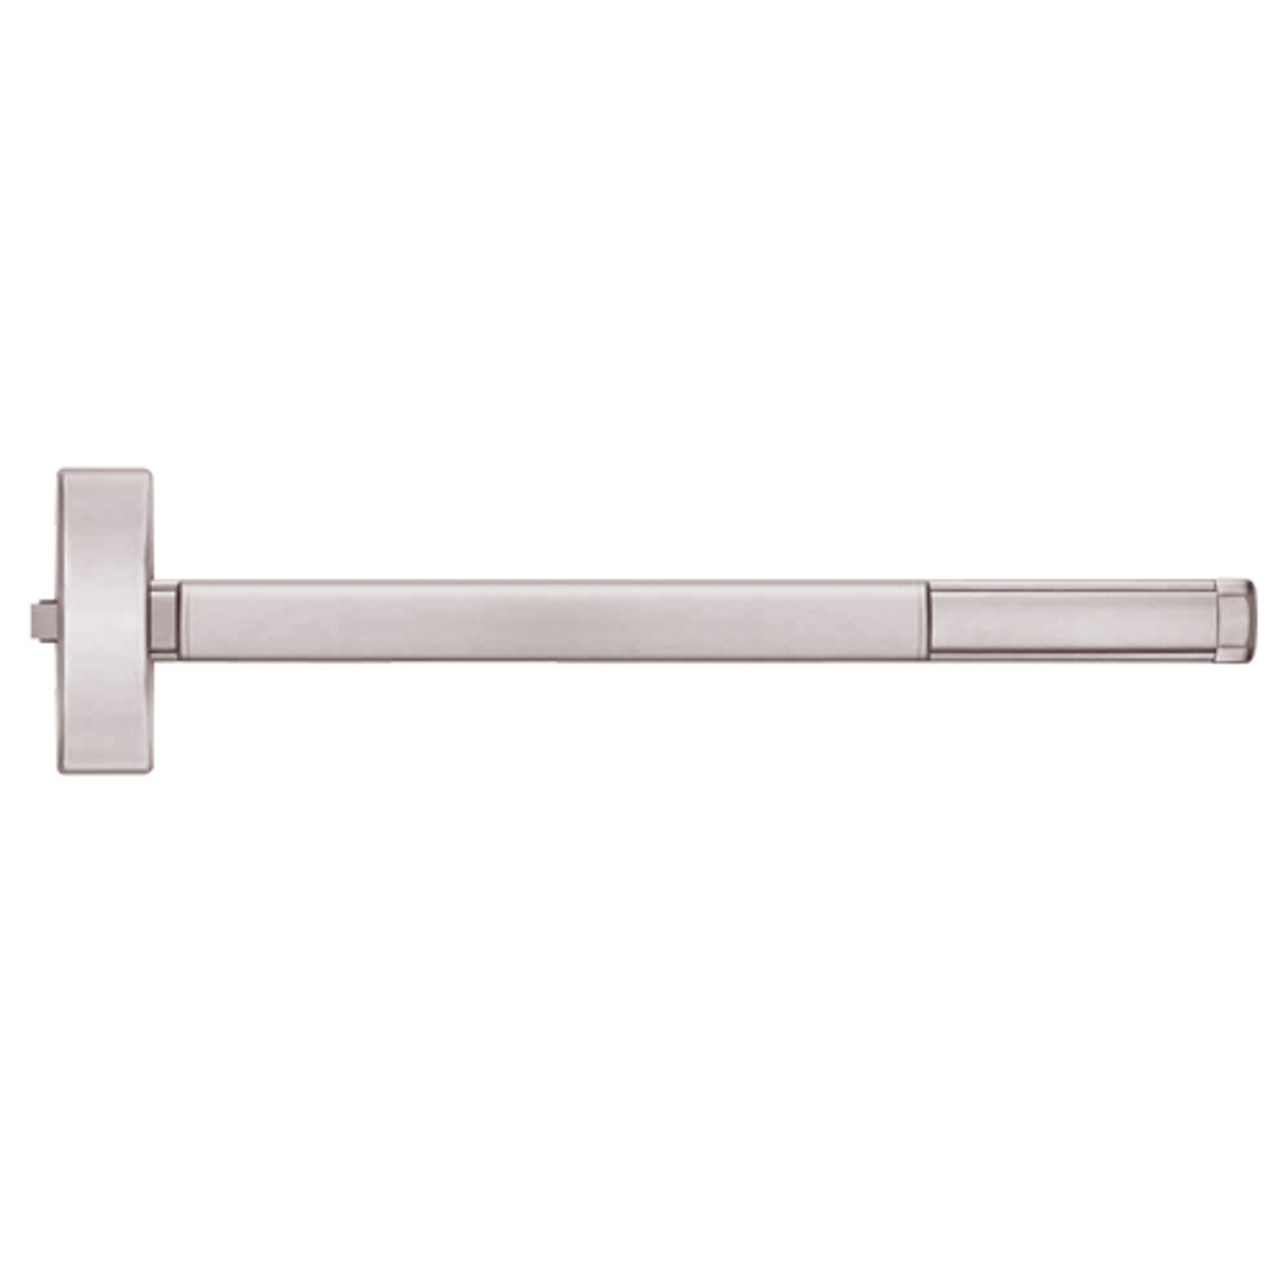 TS2114-628-48 PHI 2100 Series Non Fire Rated Apex Rim Exit Device with Touchbar Monitoring Switch Prepped for Lever-Knob Always Active in Satin Aluminum Finish